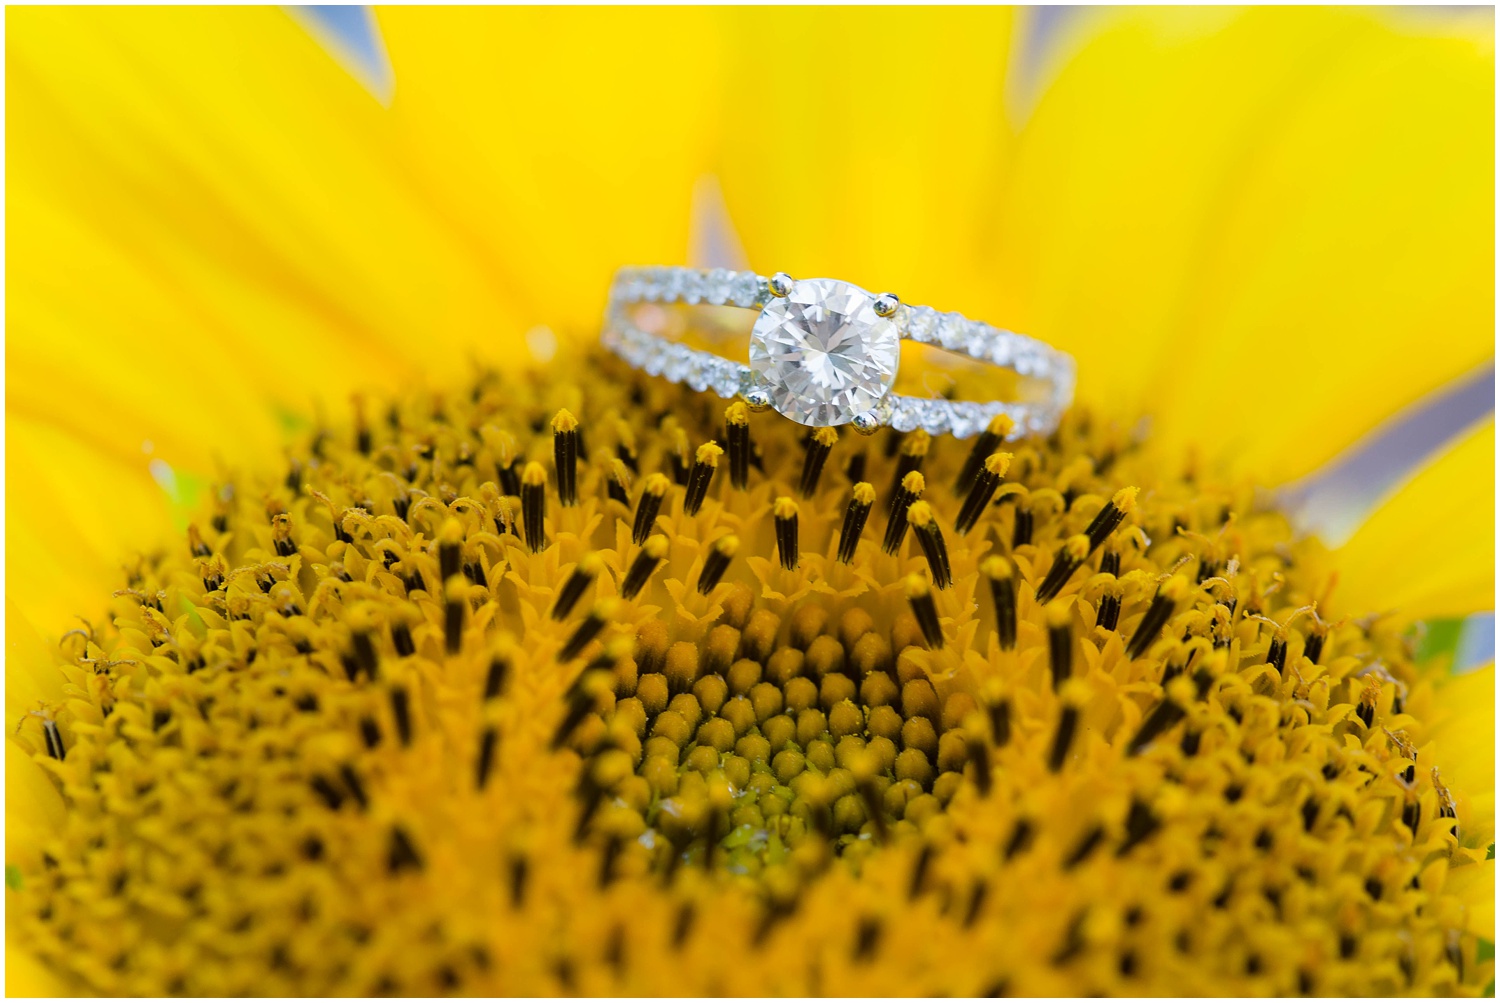 Engagement Ring on a sunflower